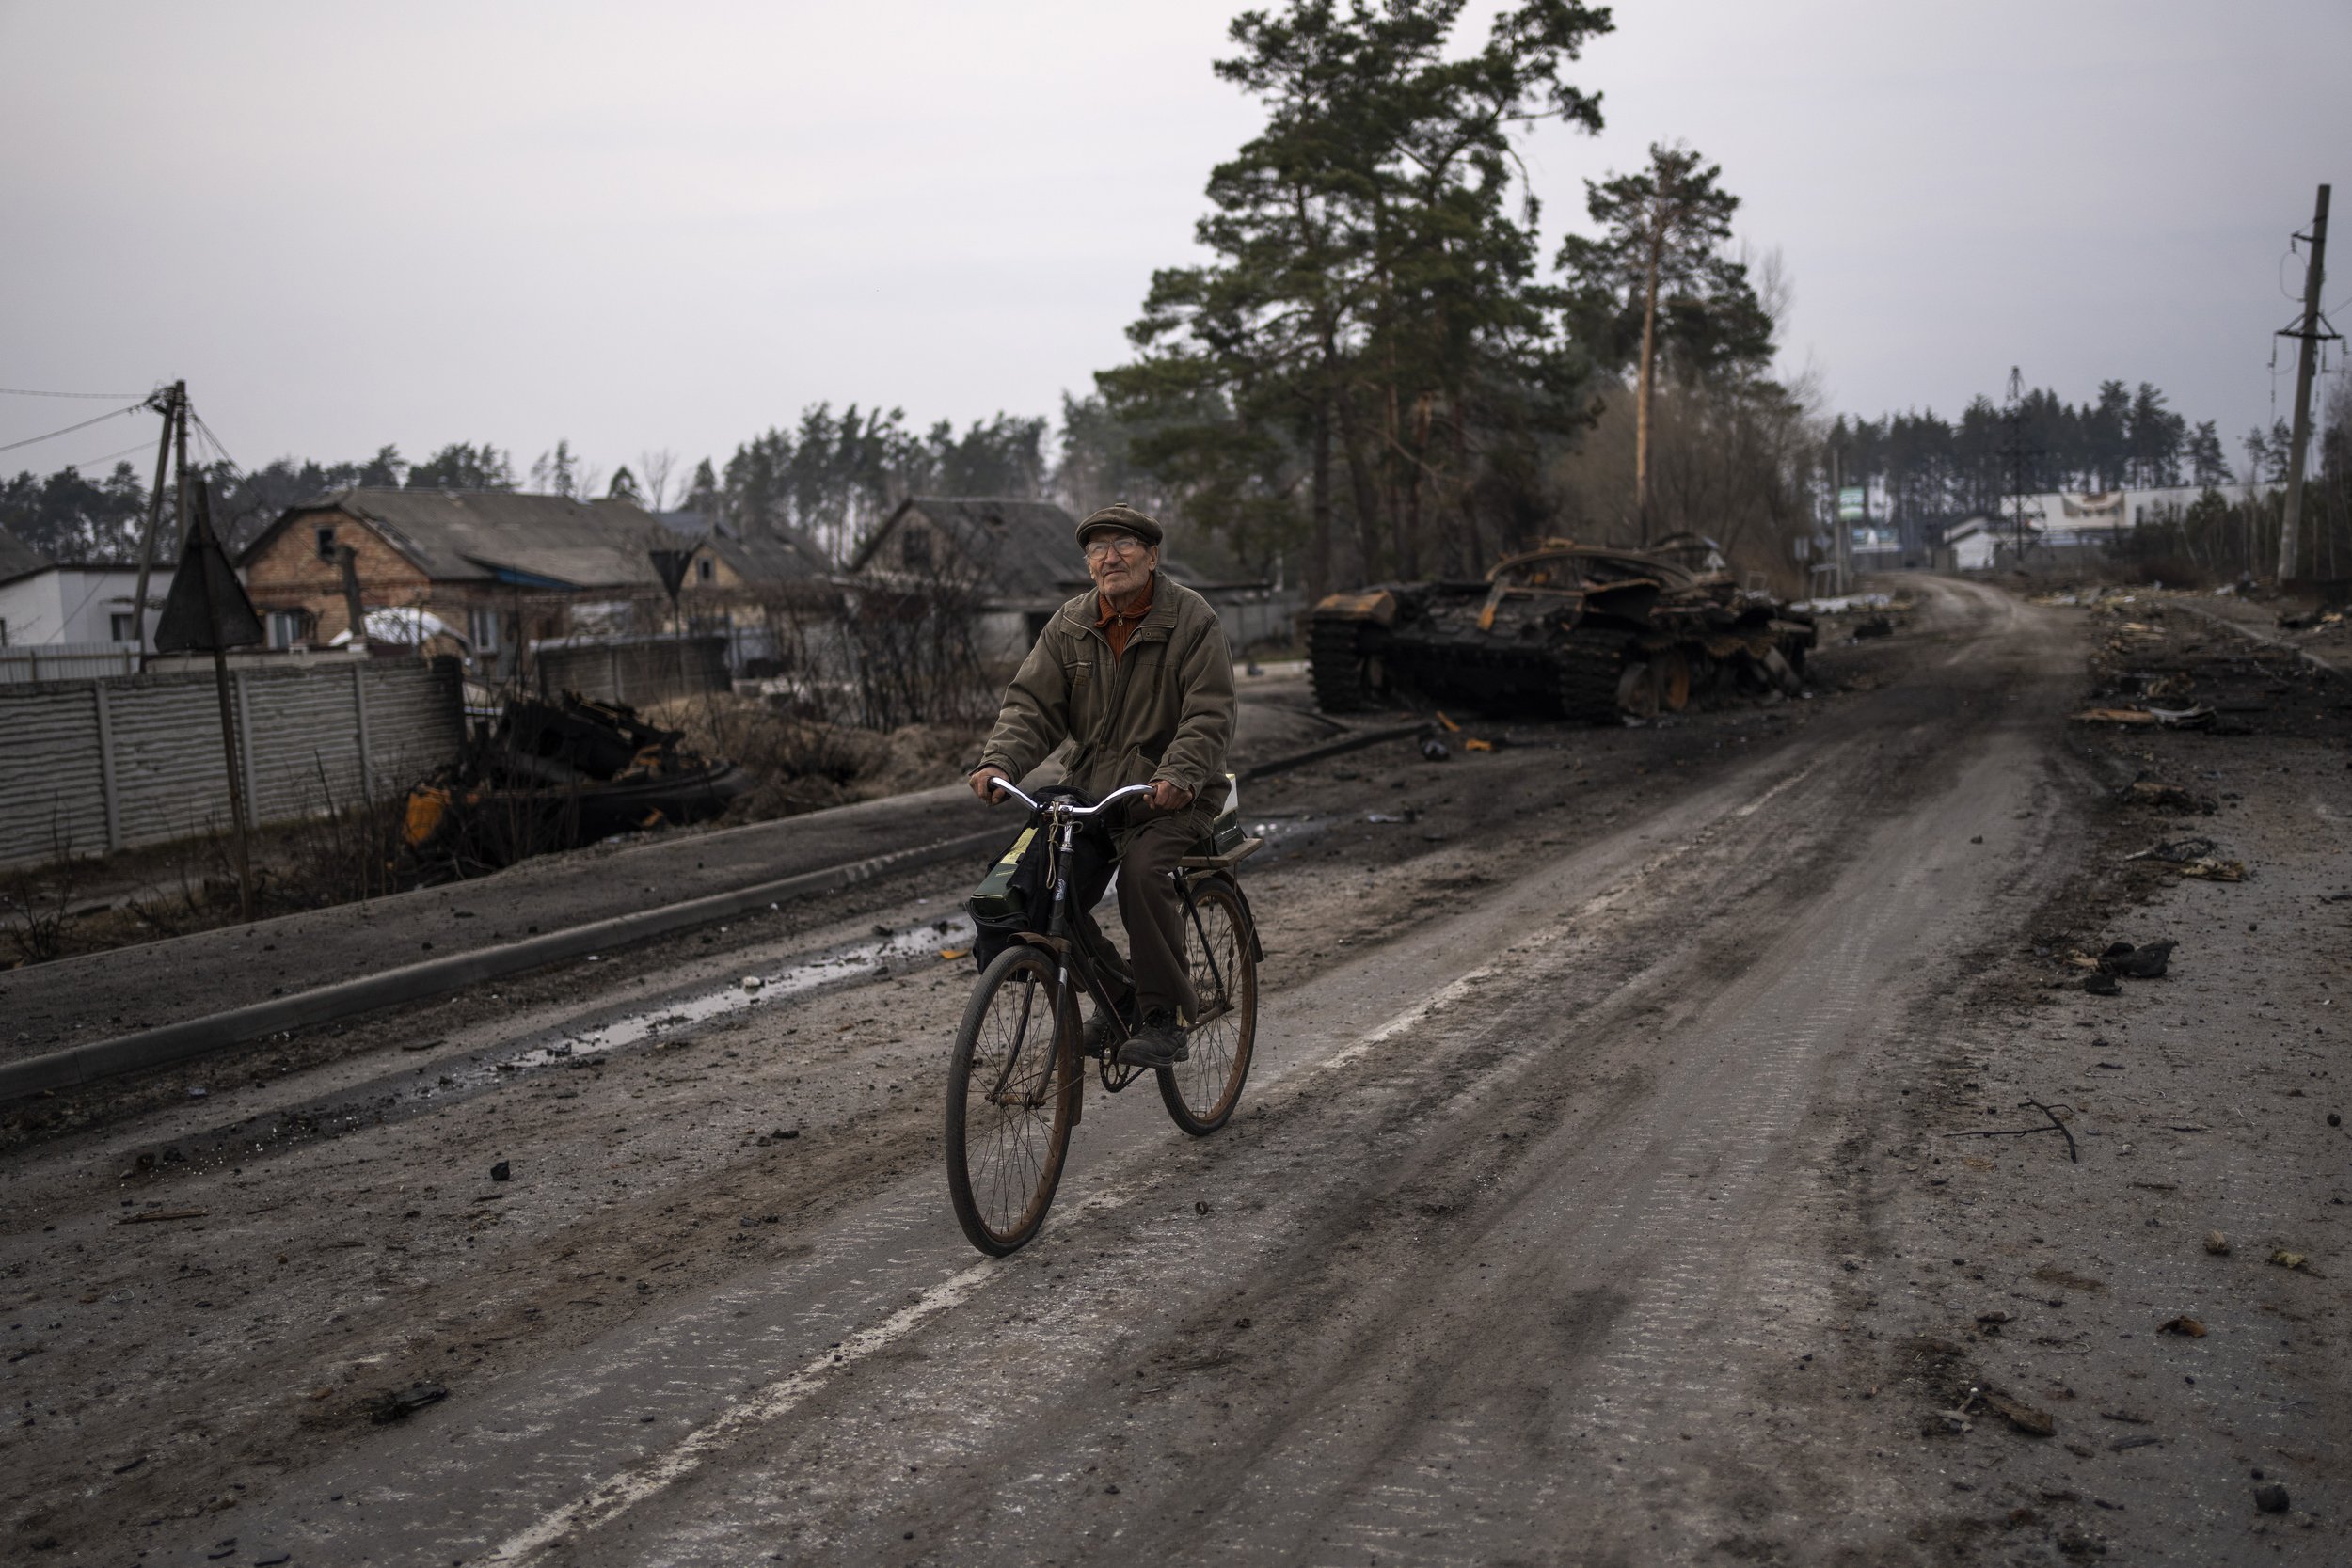  Oleksandr, 81, rides a bicycle next to a destroyed Russian tank in the outskirts of Kyiv, Ukraine, Thursday, March 31, 2022. (AP Photo/Rodrigo Abd) 